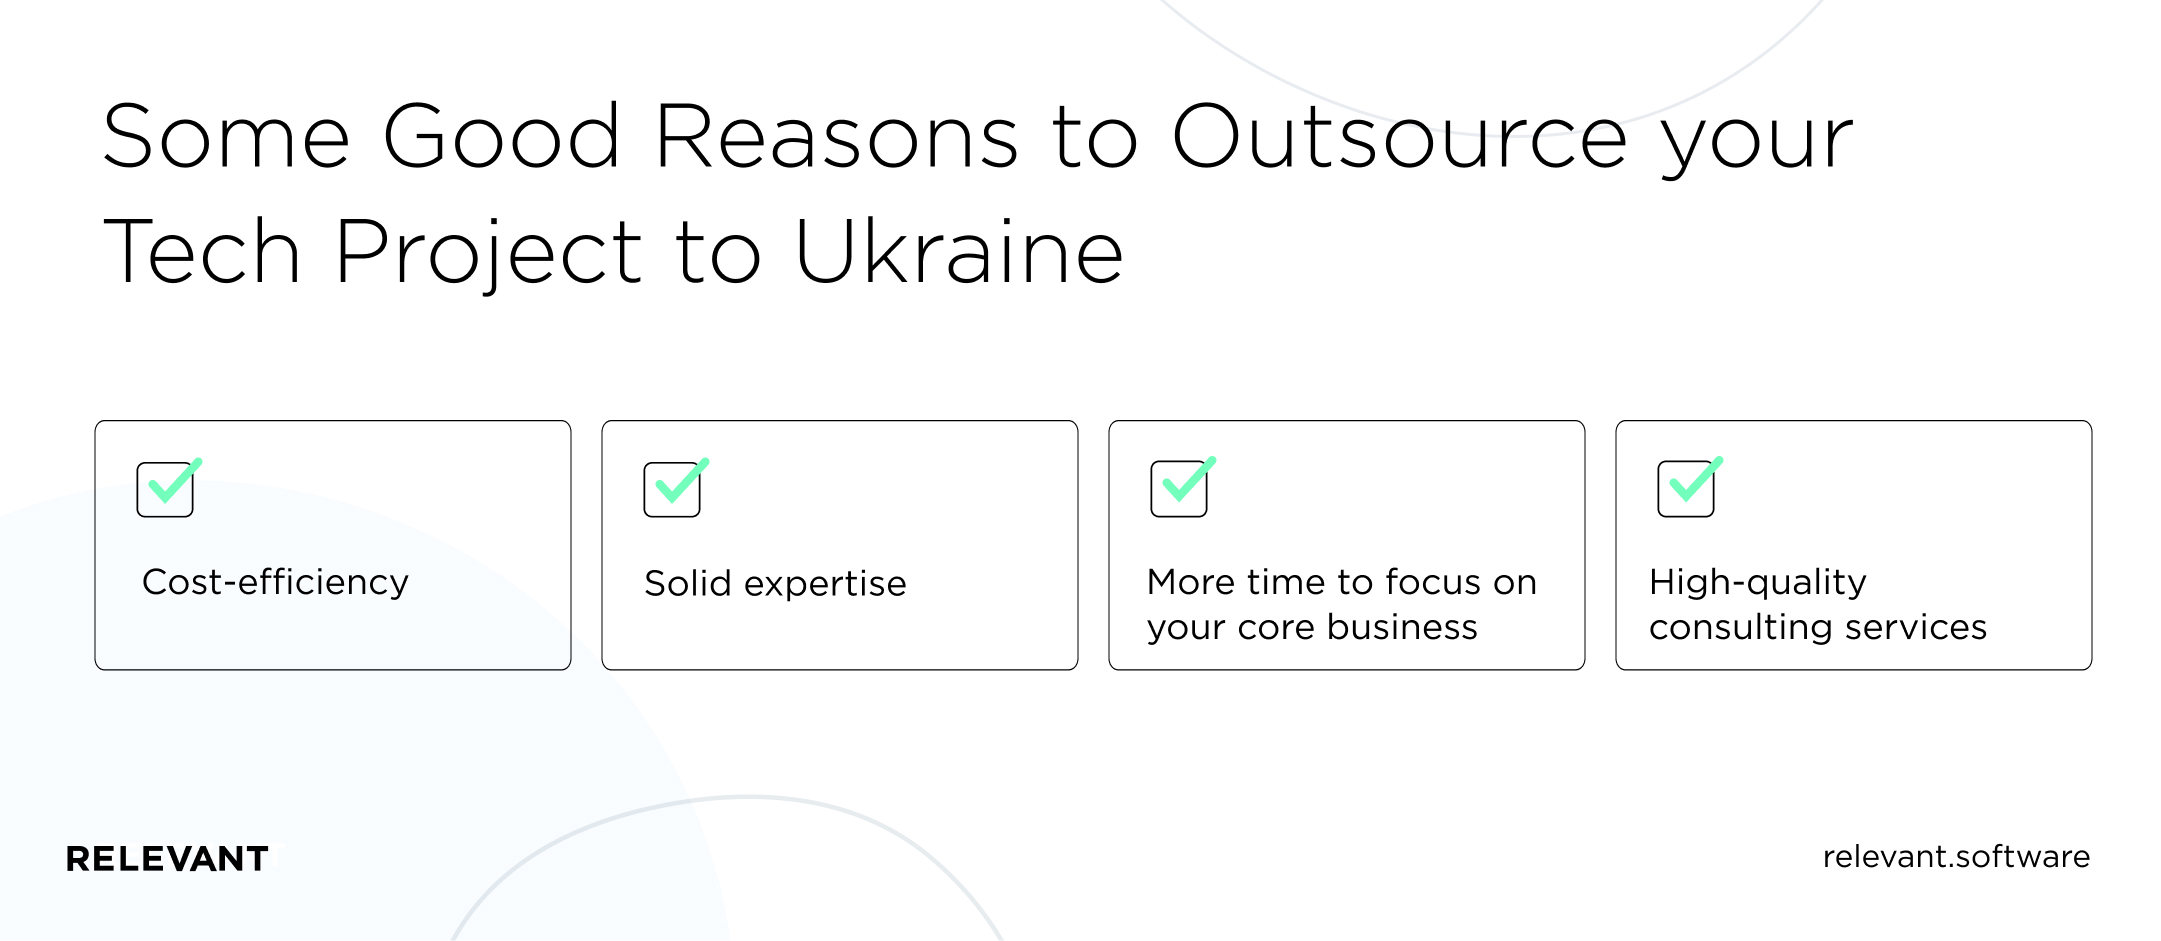 reasons for software development outsourcing to Ukraine